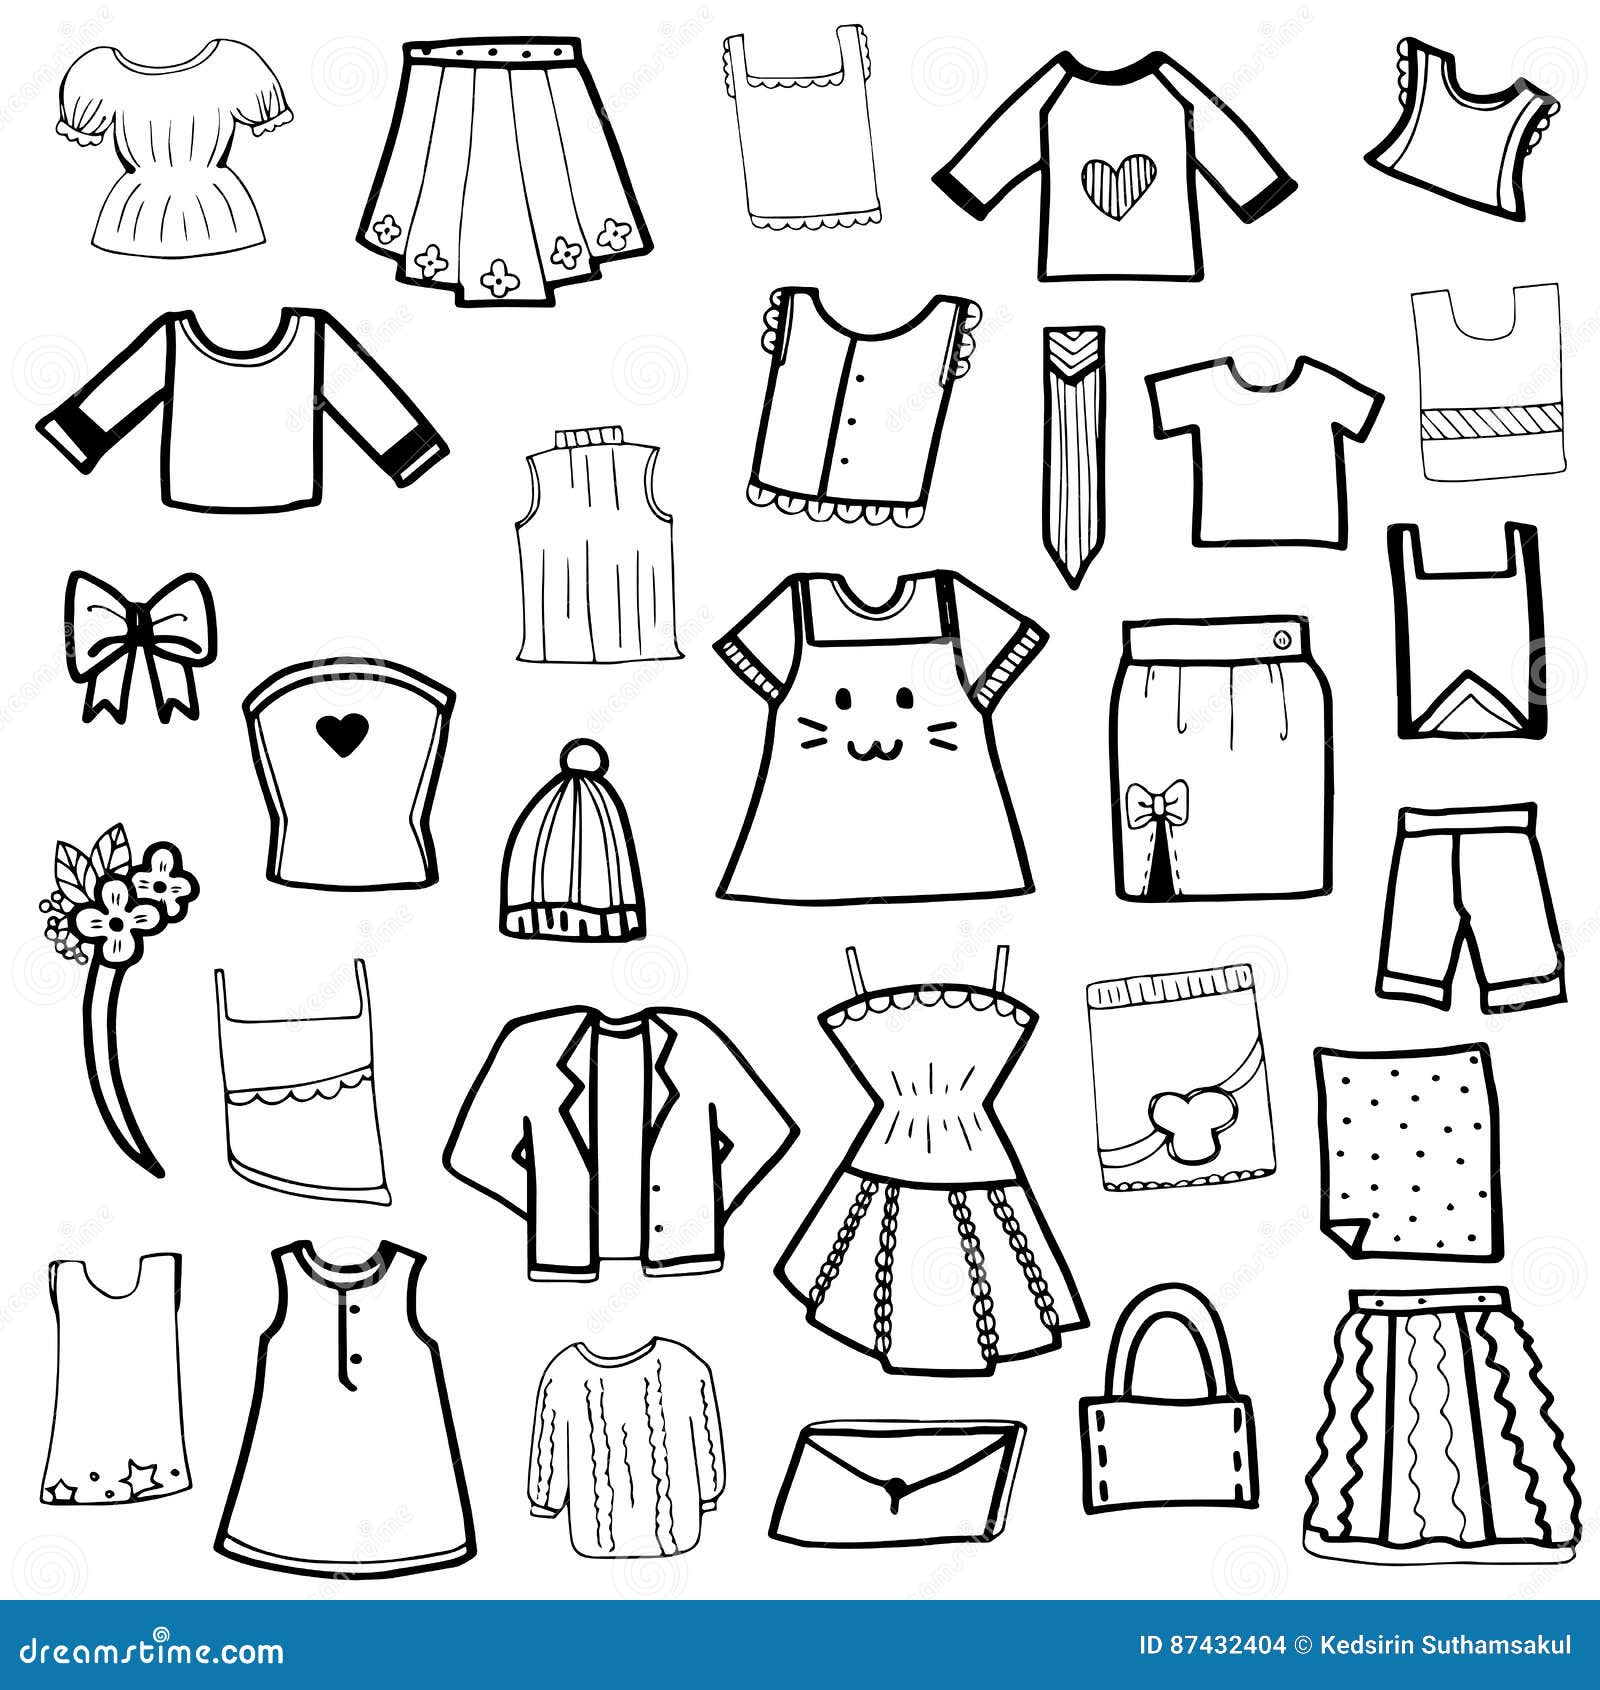 Clothes doodle vector stock vector. Illustration of style - 87432404